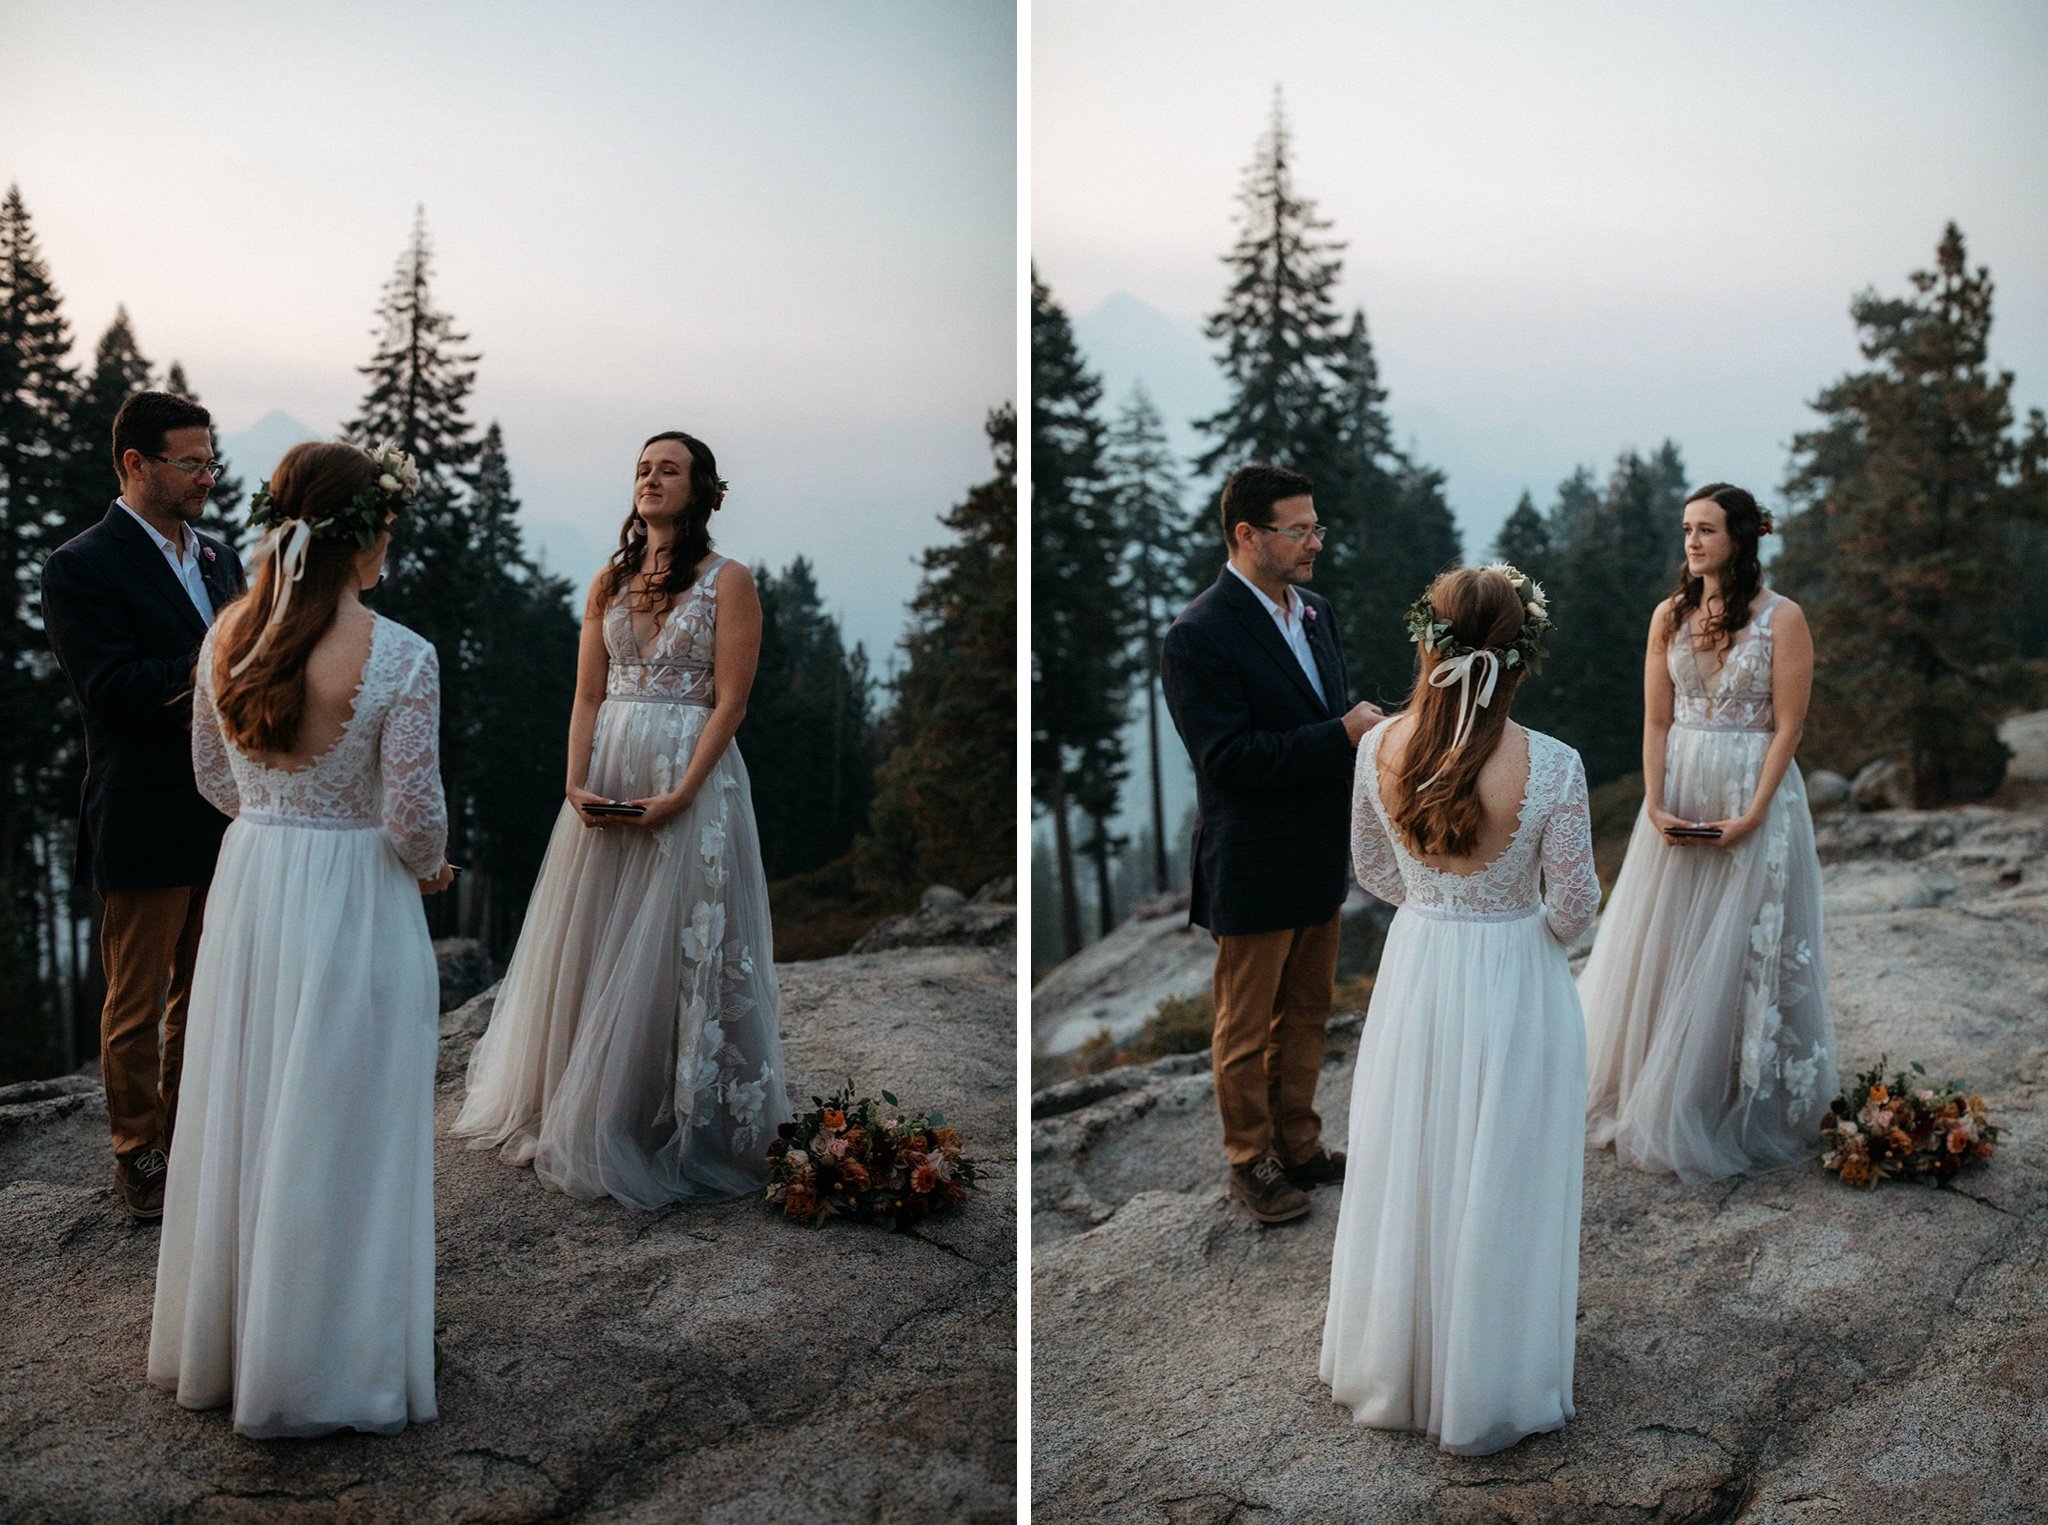 Yosemite National Park Elopement with Two Brides-Will Khoury61.jpg